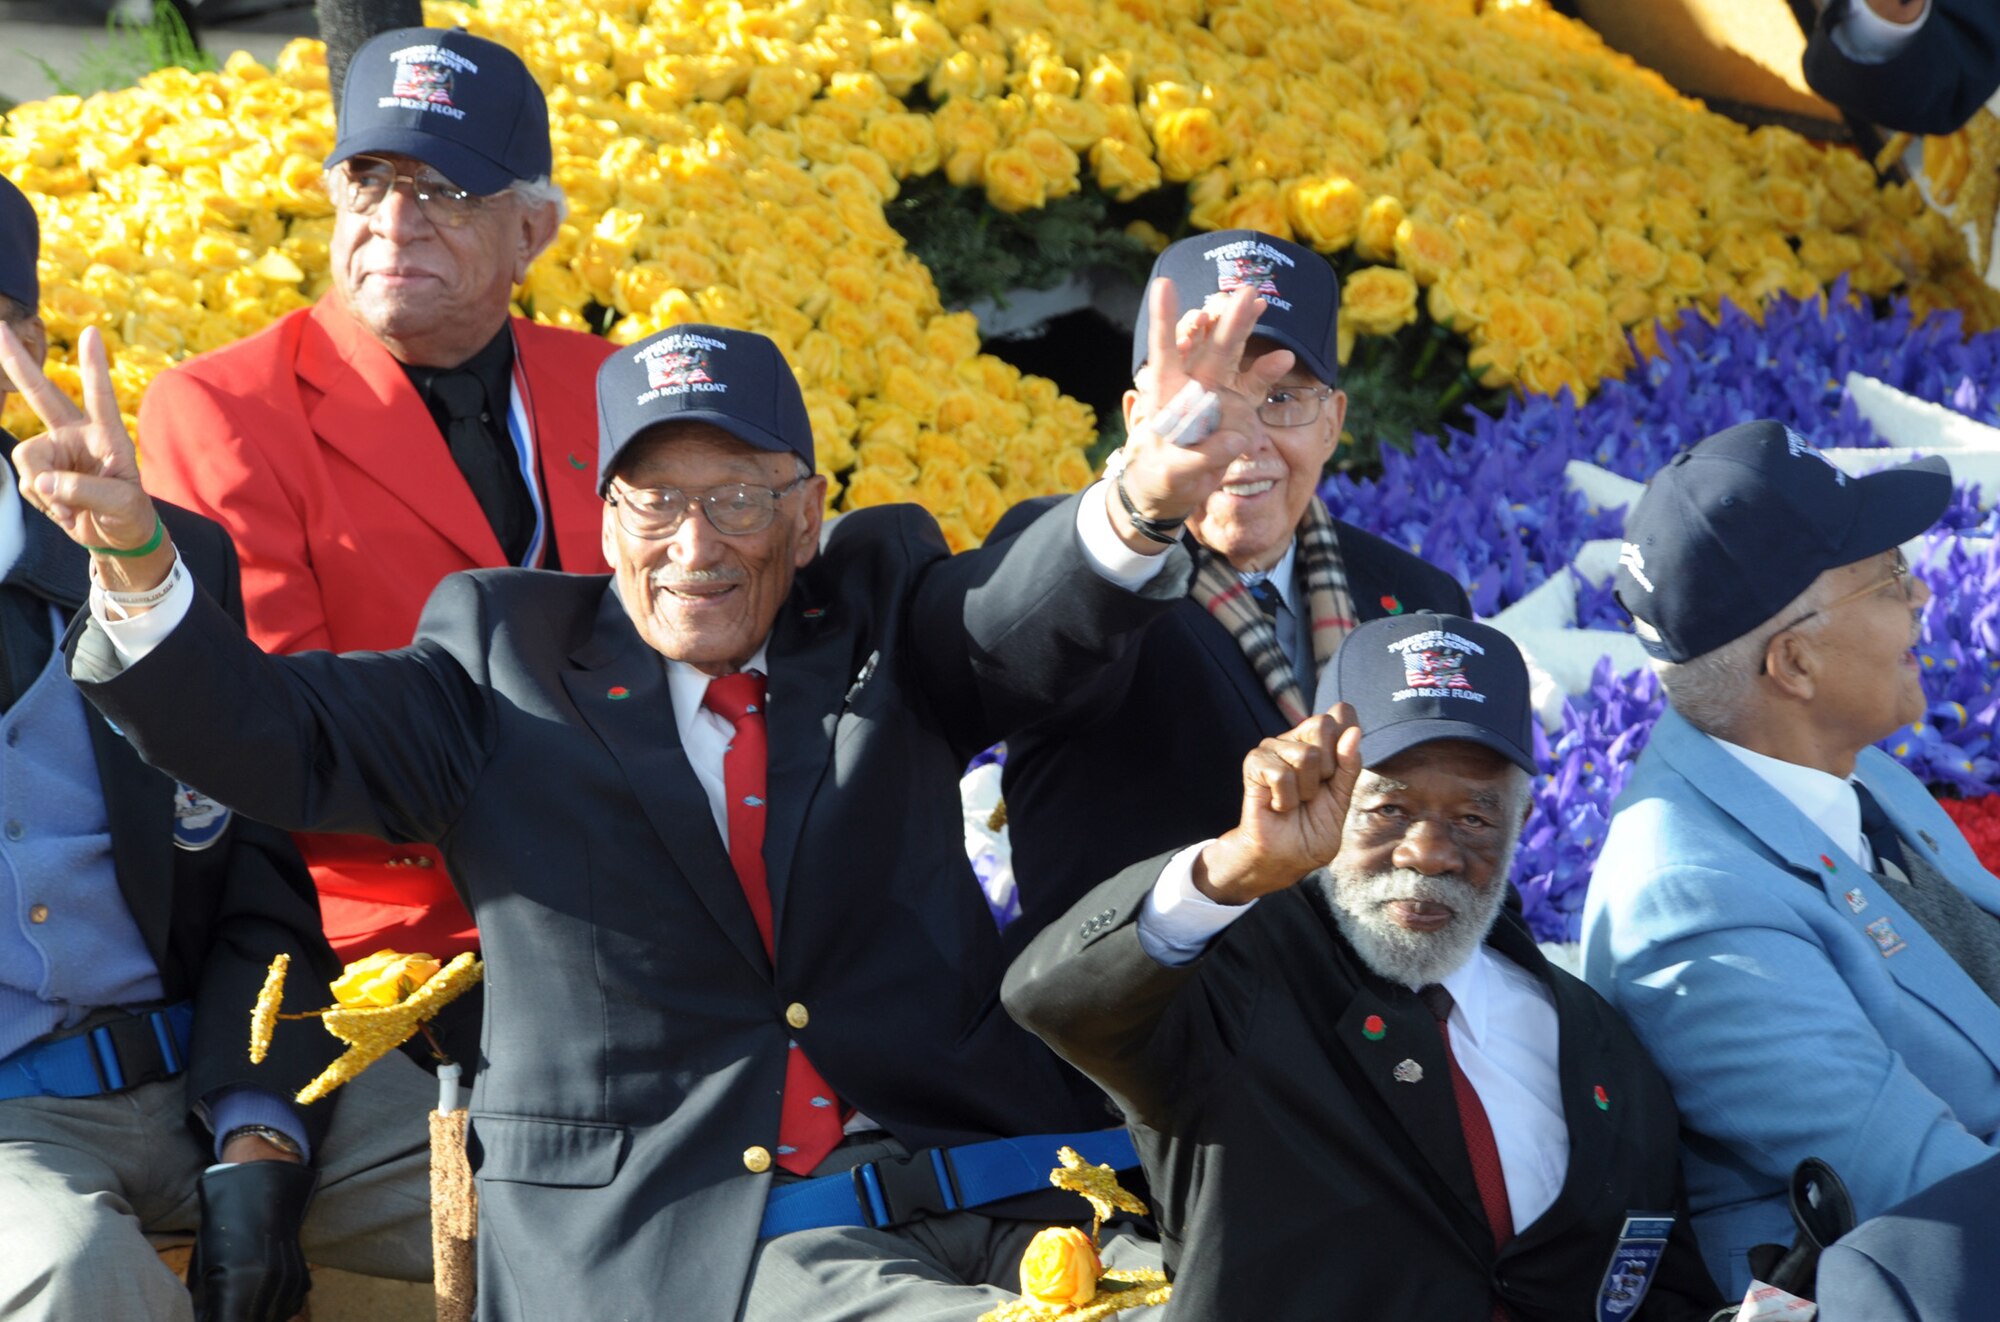 A group of Tuskegee Airmen wave to the crowd from the City of West Covina‘s float during the Tournament of Roses Parade, Jan 1. (Photo by Atiba S. Copeland)